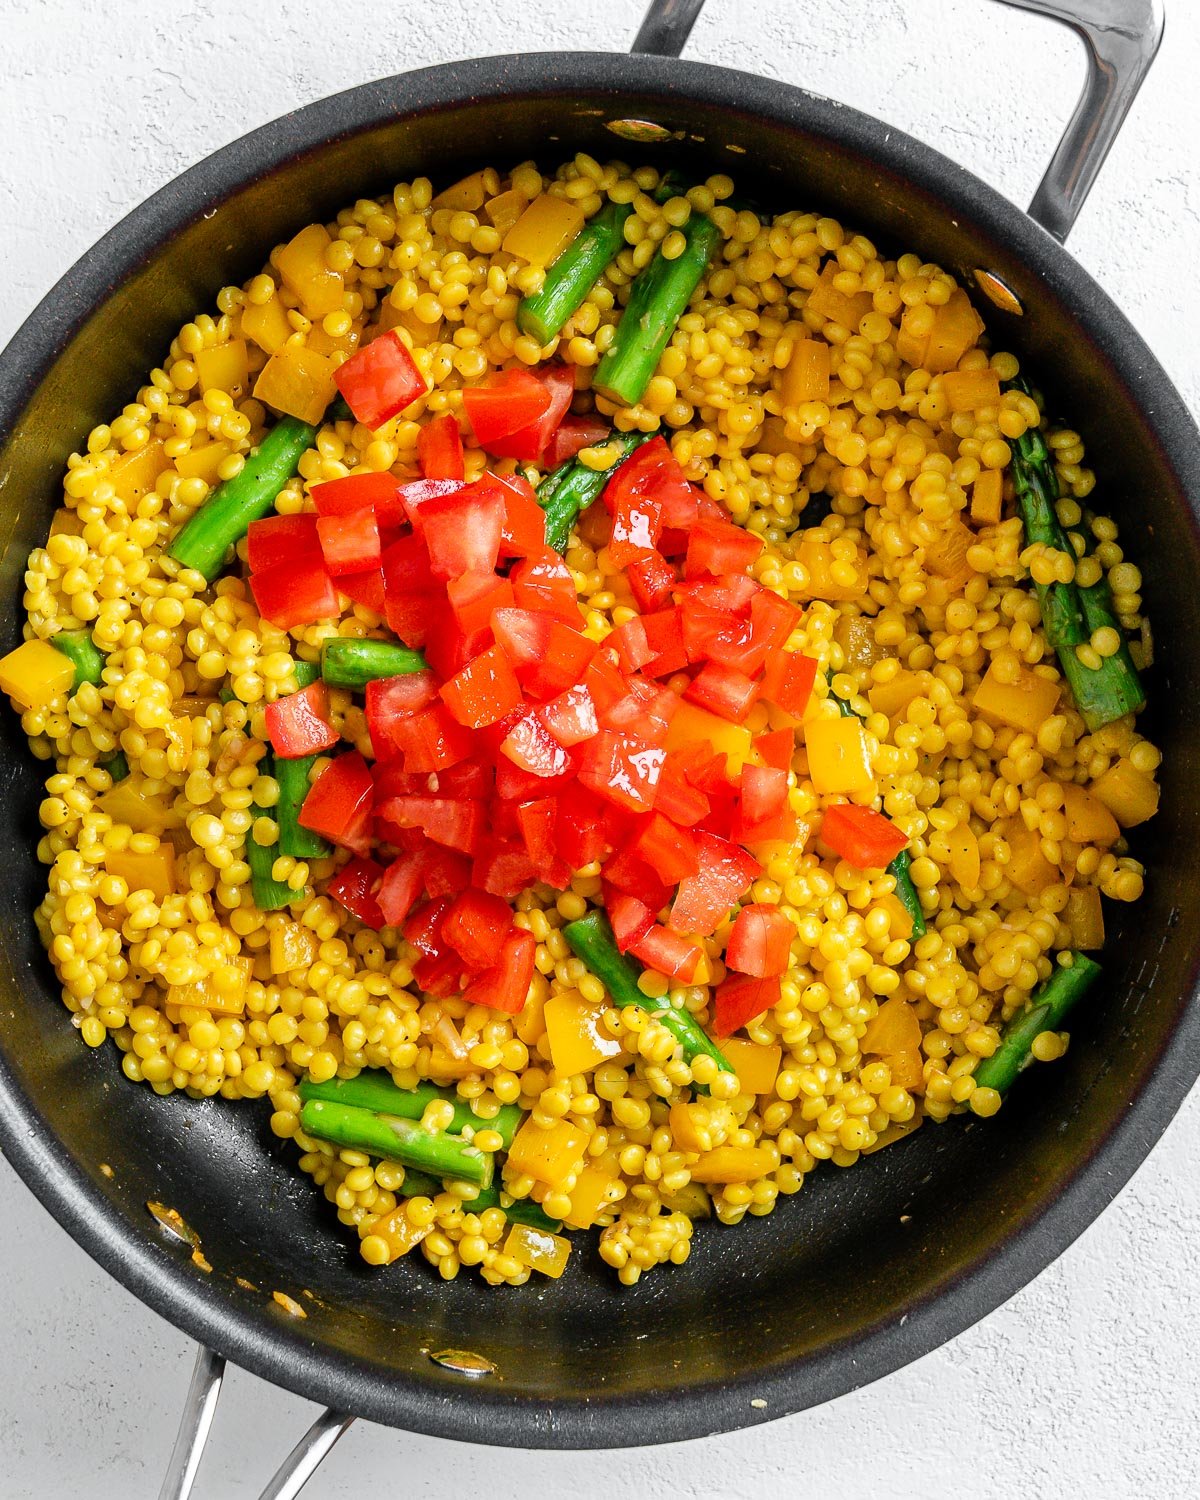 process of adding tomatoes to couscous veggie mix in pan